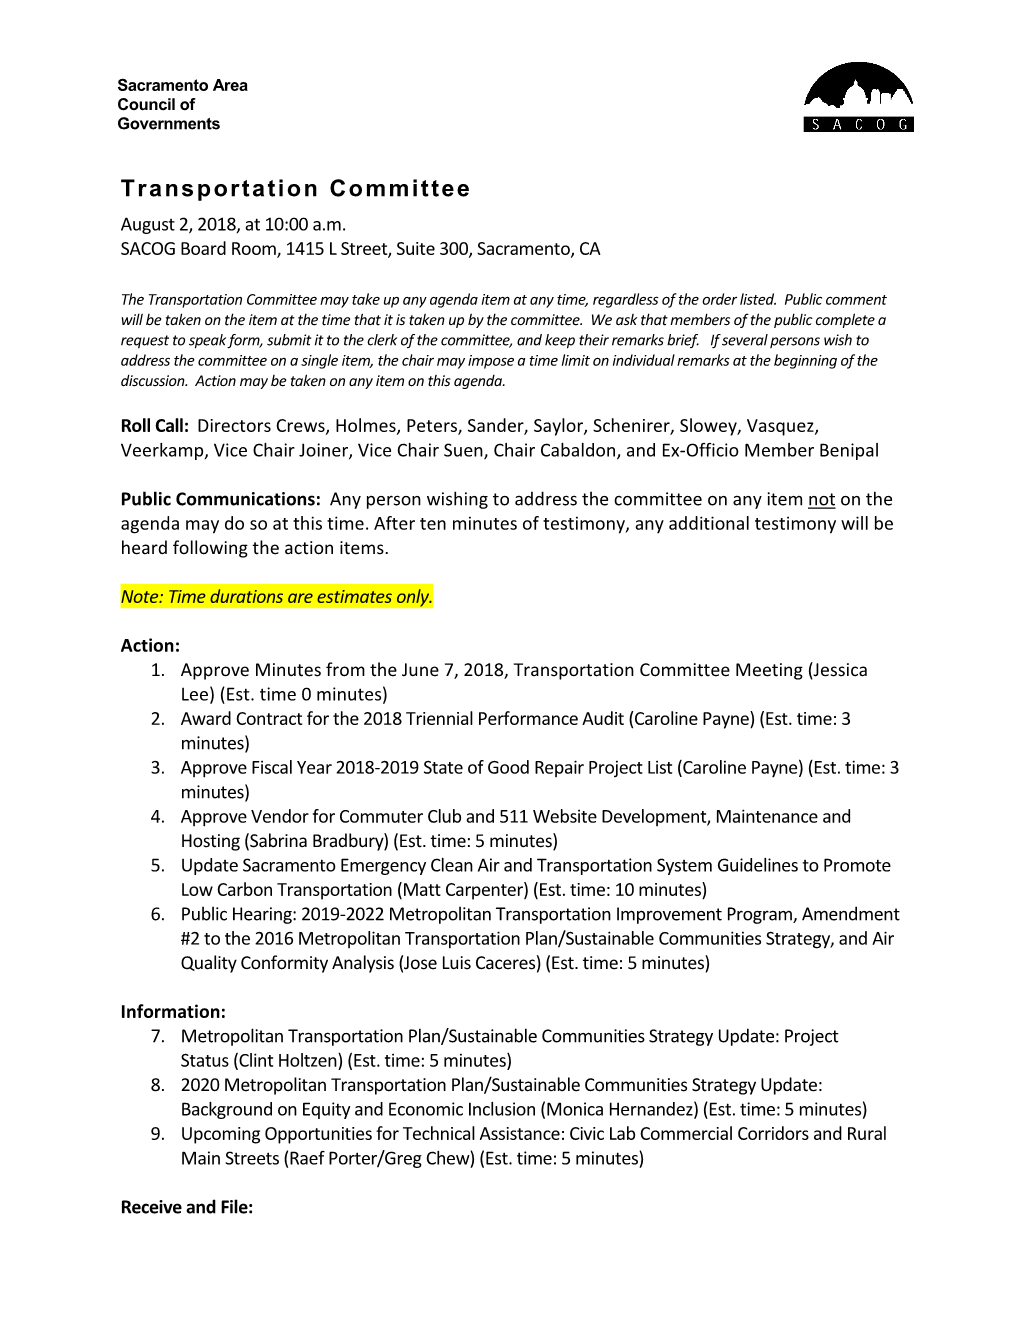 Transportation Committee August 2, 2018, at 10:00 A.M